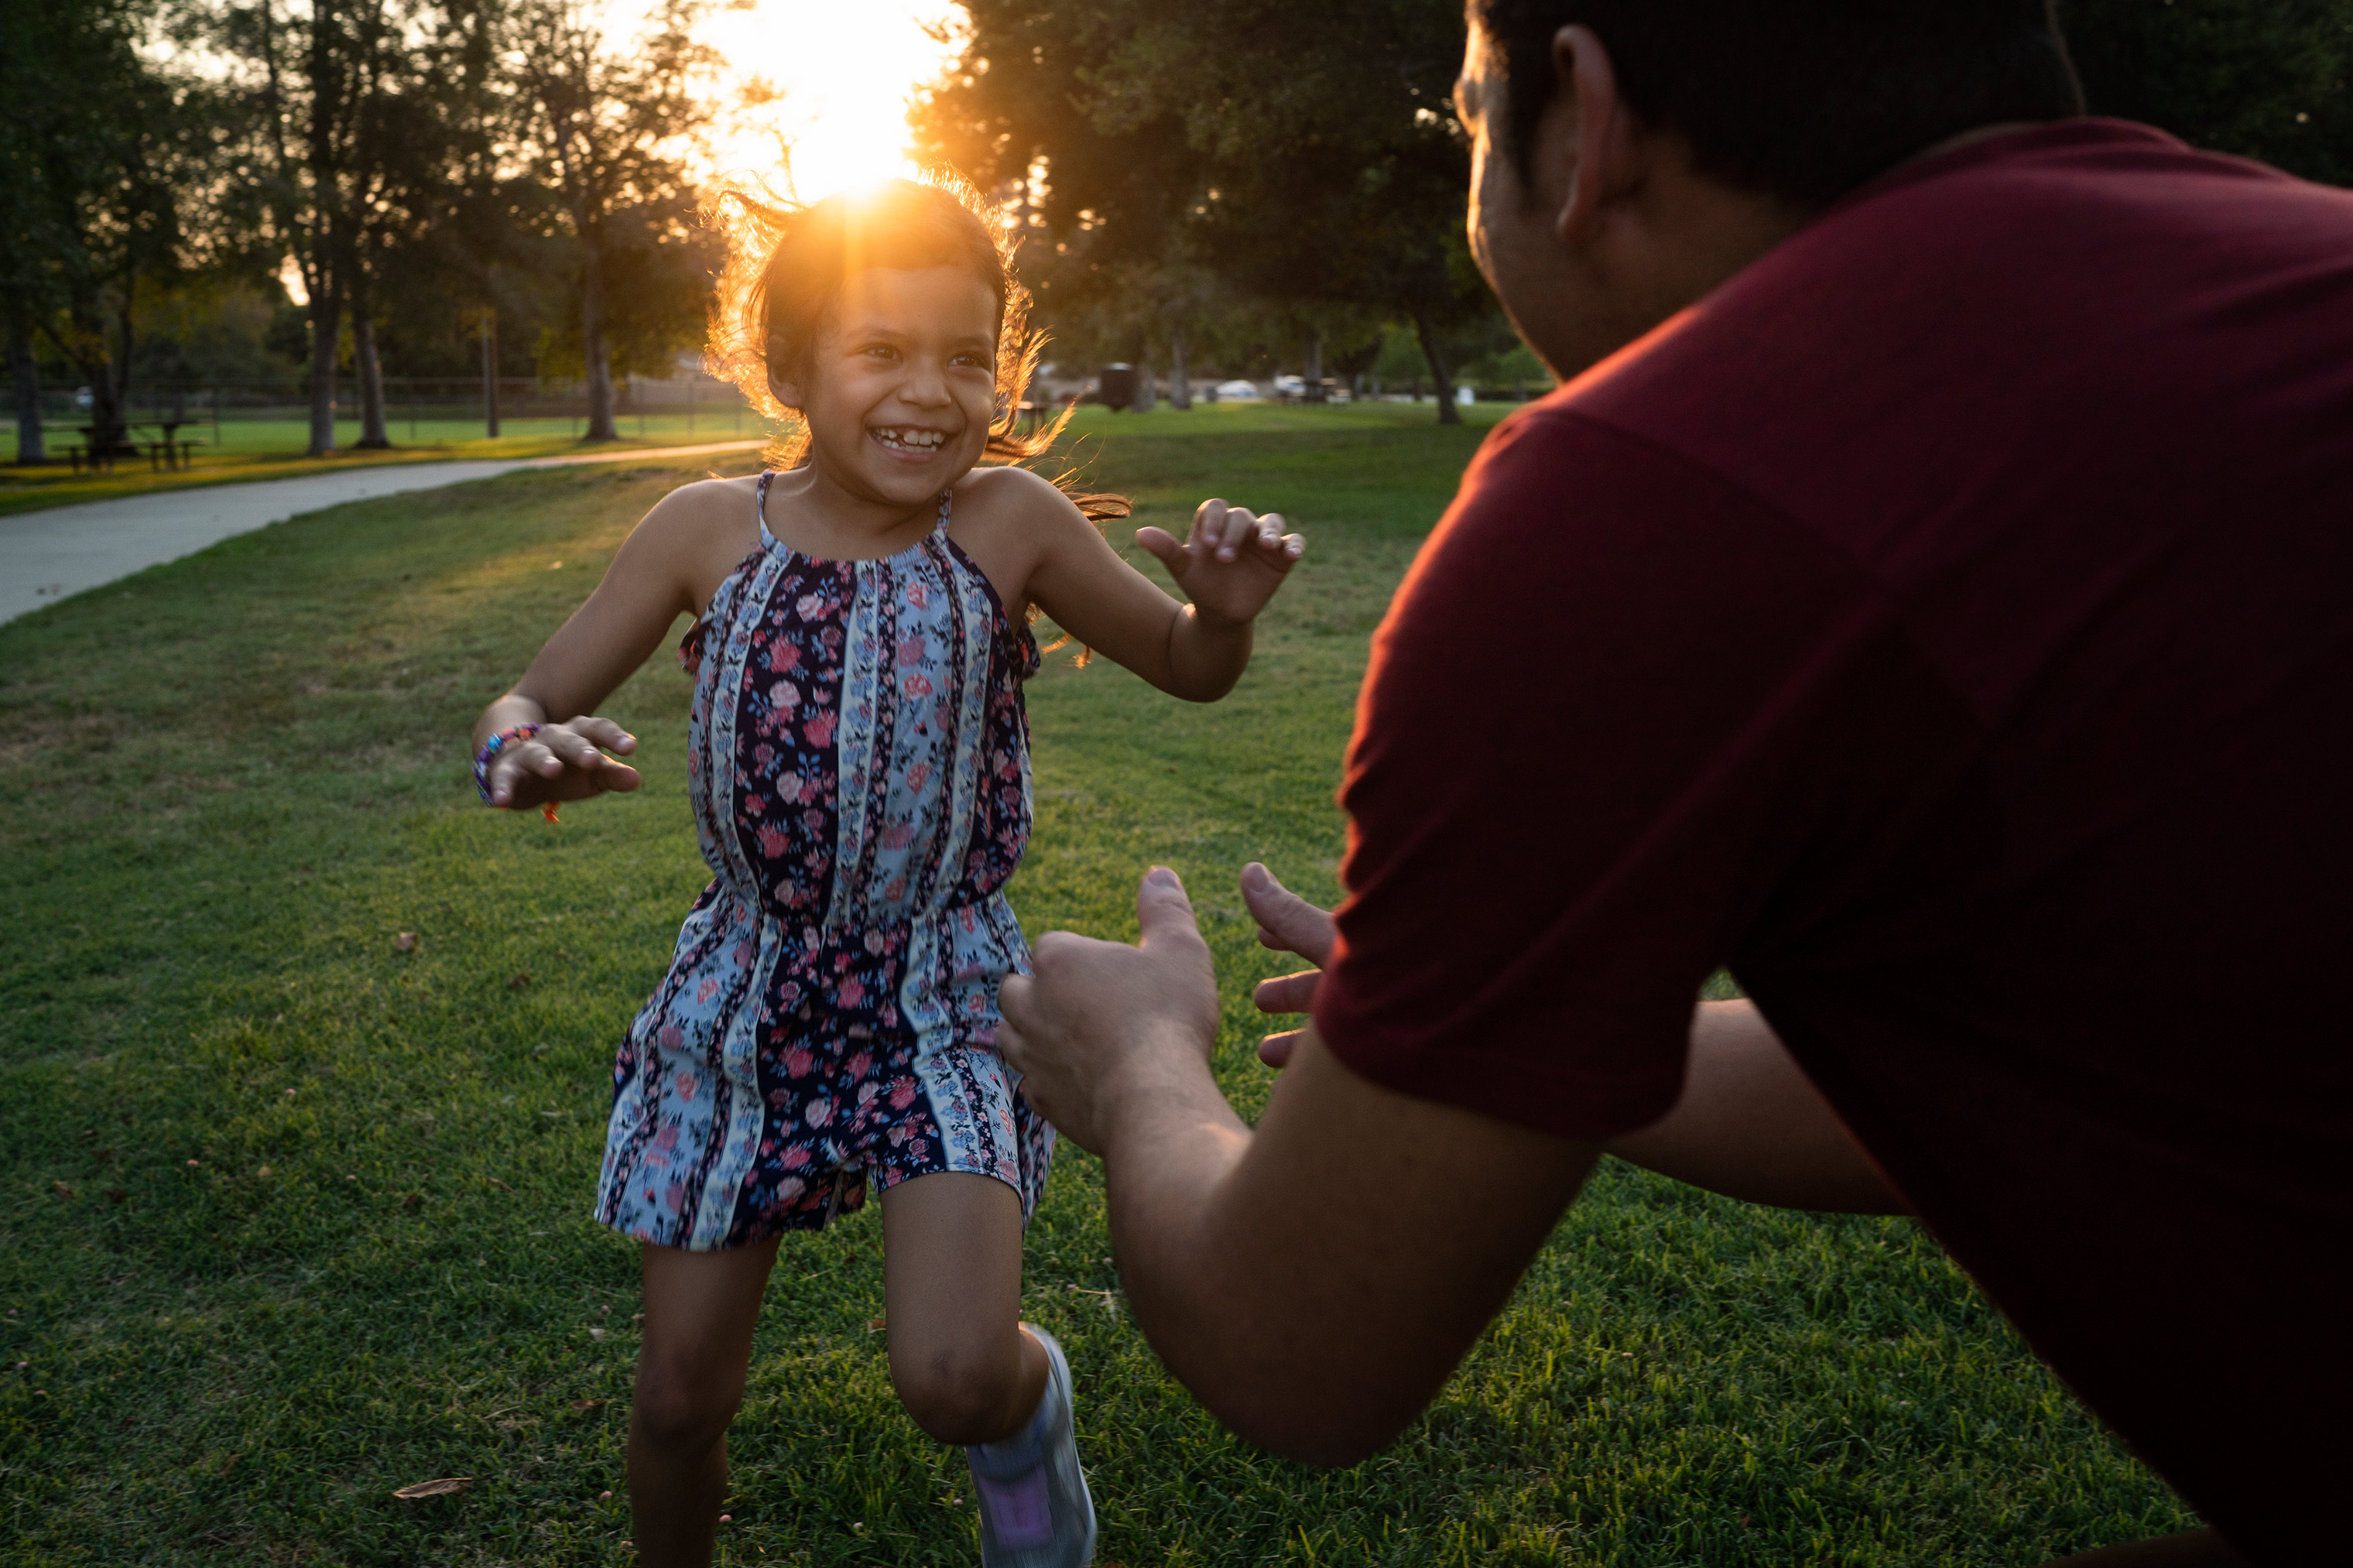 Heyli and her father play together at a park near their temporary home in Southern California. (Veronica G. Cardenas for TIME and The Texas Tribune)